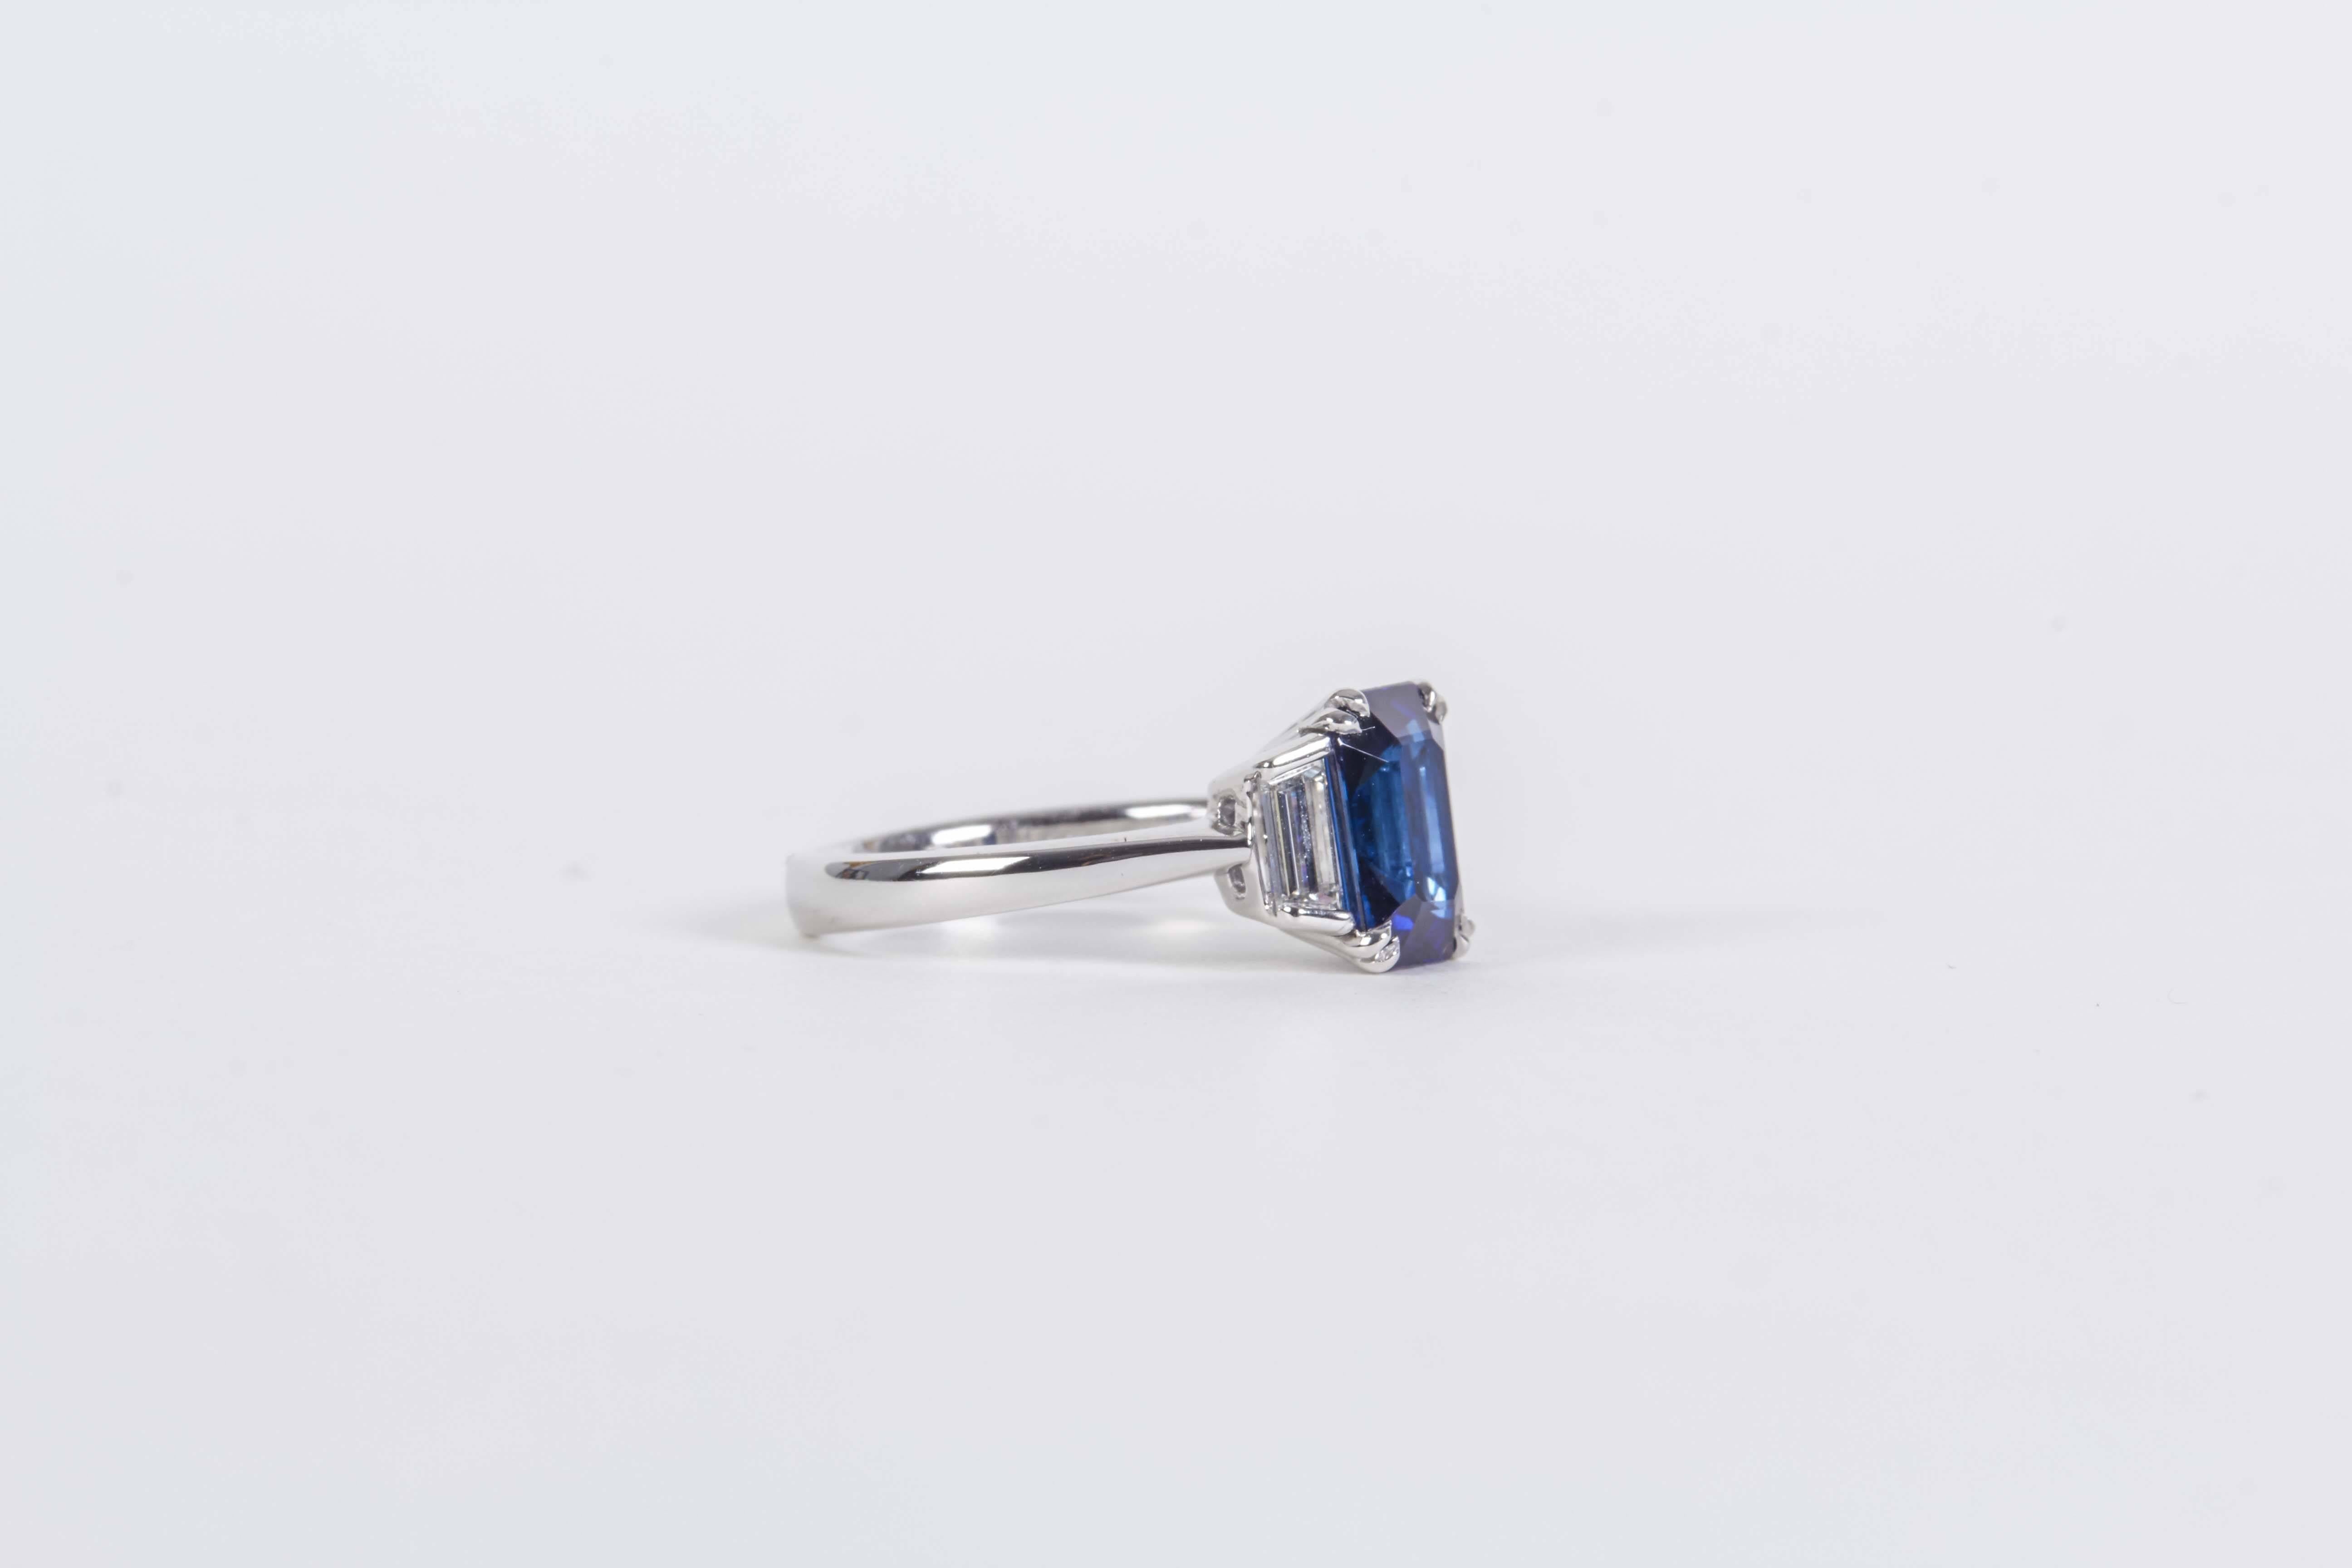 

An elegant sapphire and diamond ring.

2.57 carat Emerald Cut GIA Certified sapphire set with .55 carats of step cut trapezoid diamonds. 

Set in platinum.

A beautiful ring that can be worn daily. 